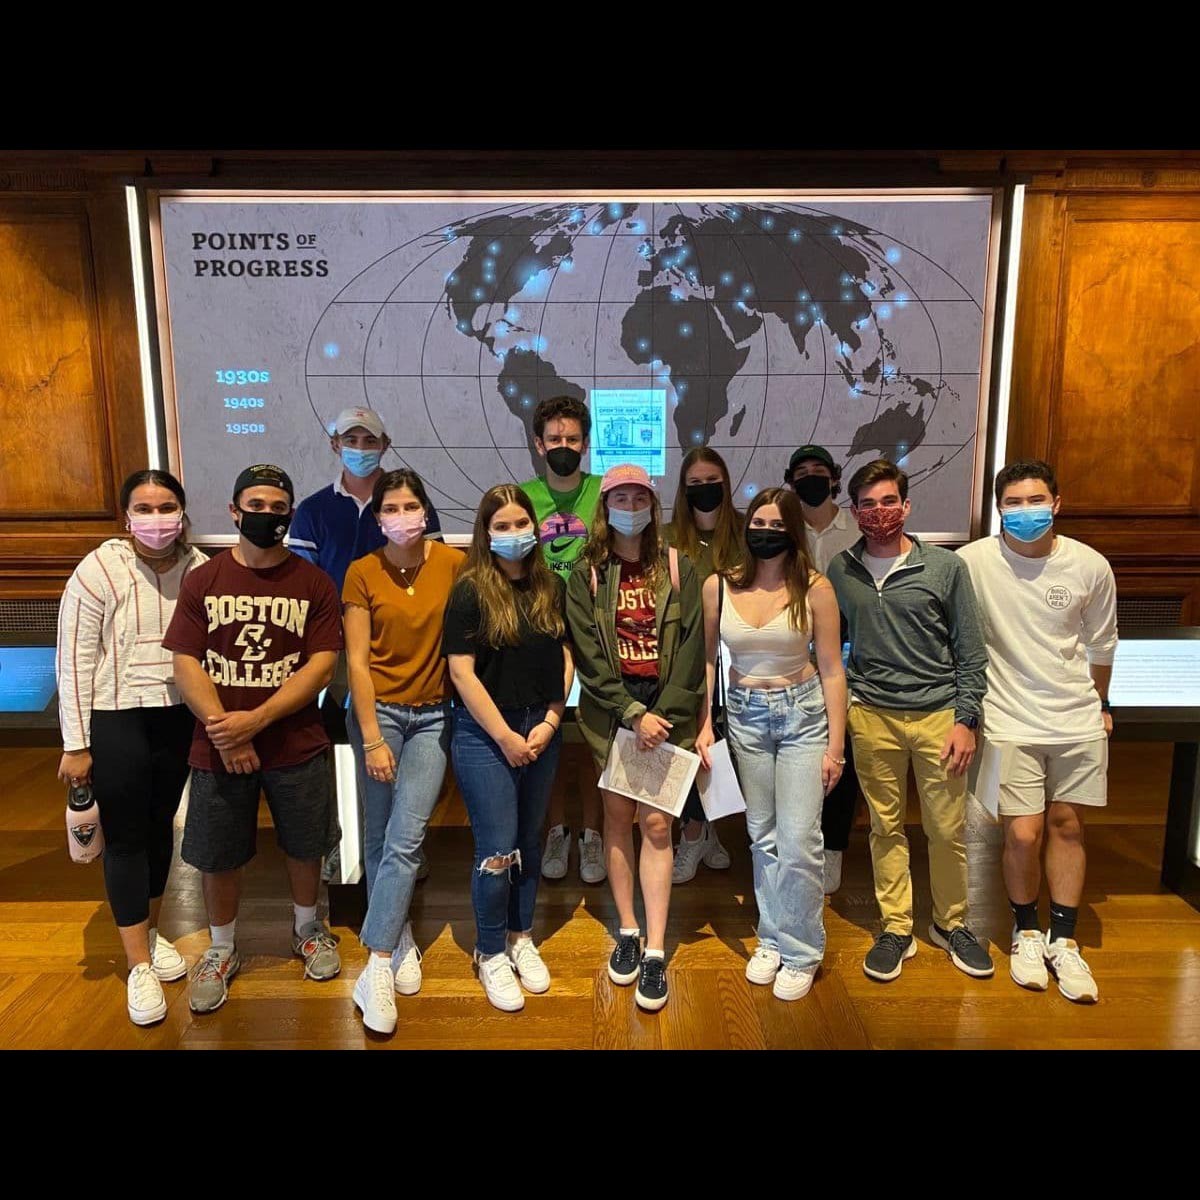 Students from Prof. Grant's "Where on Earth" course visit the Mapparium in Boston.